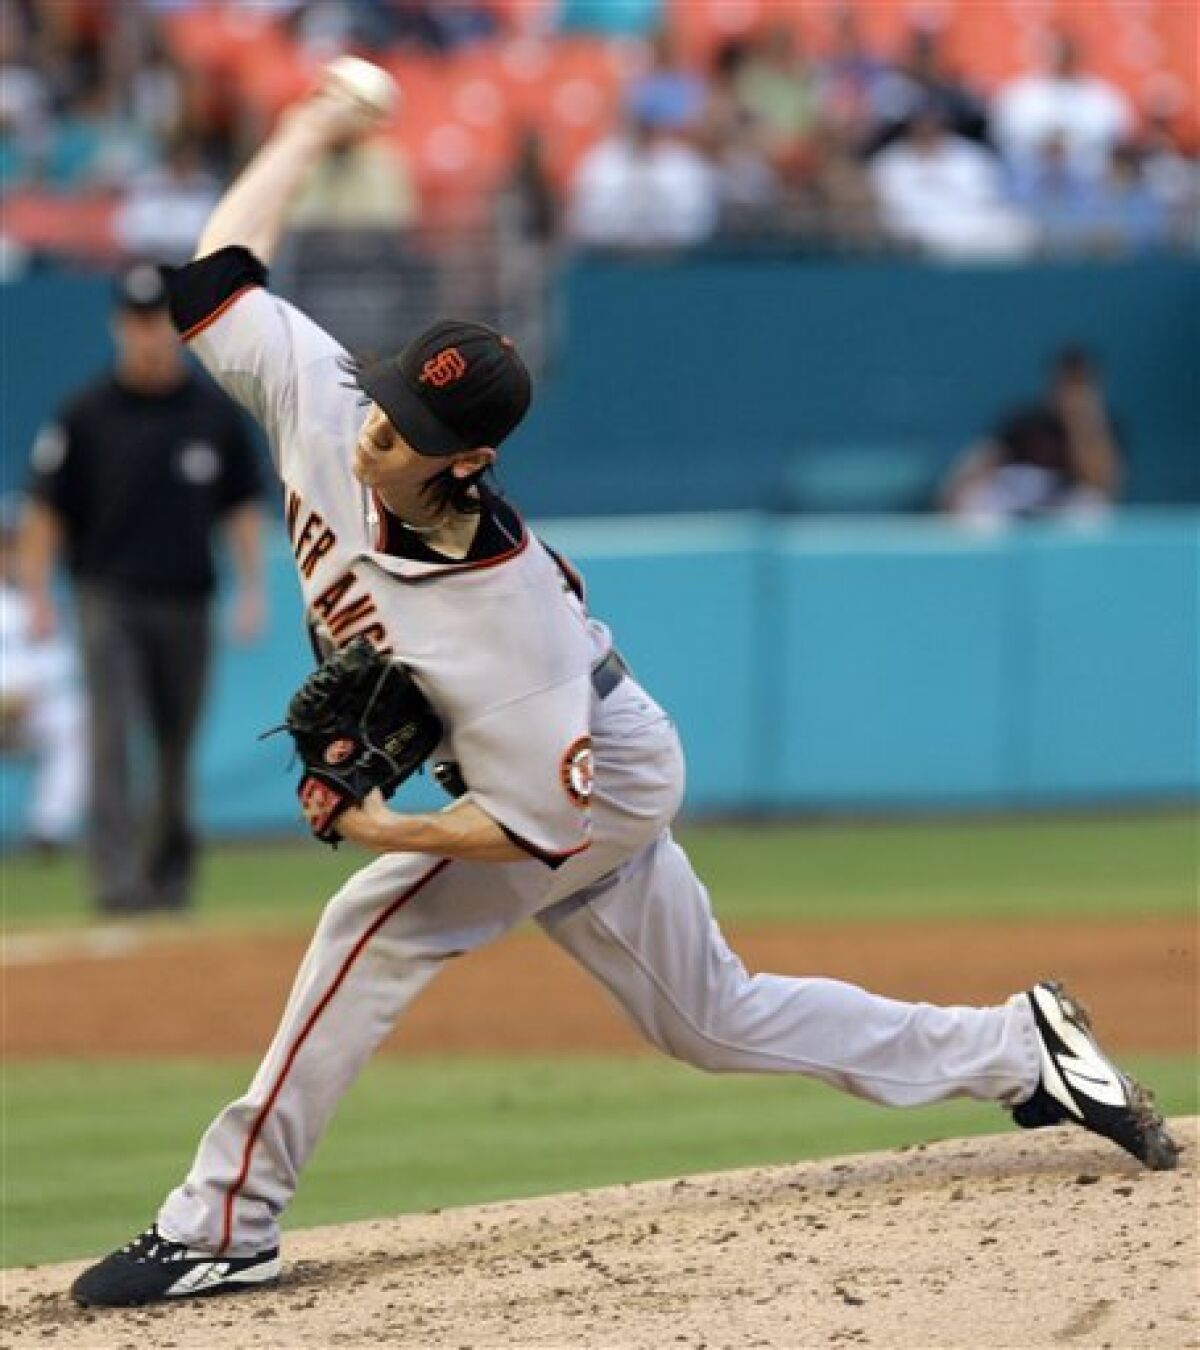 San Francisco Giants' Tim Lincecum pitches against the Florida Marlins in the second inning of a baseball game in Miami, Sunday, June 7, 2009. (AP Photo/Alan Diaz)